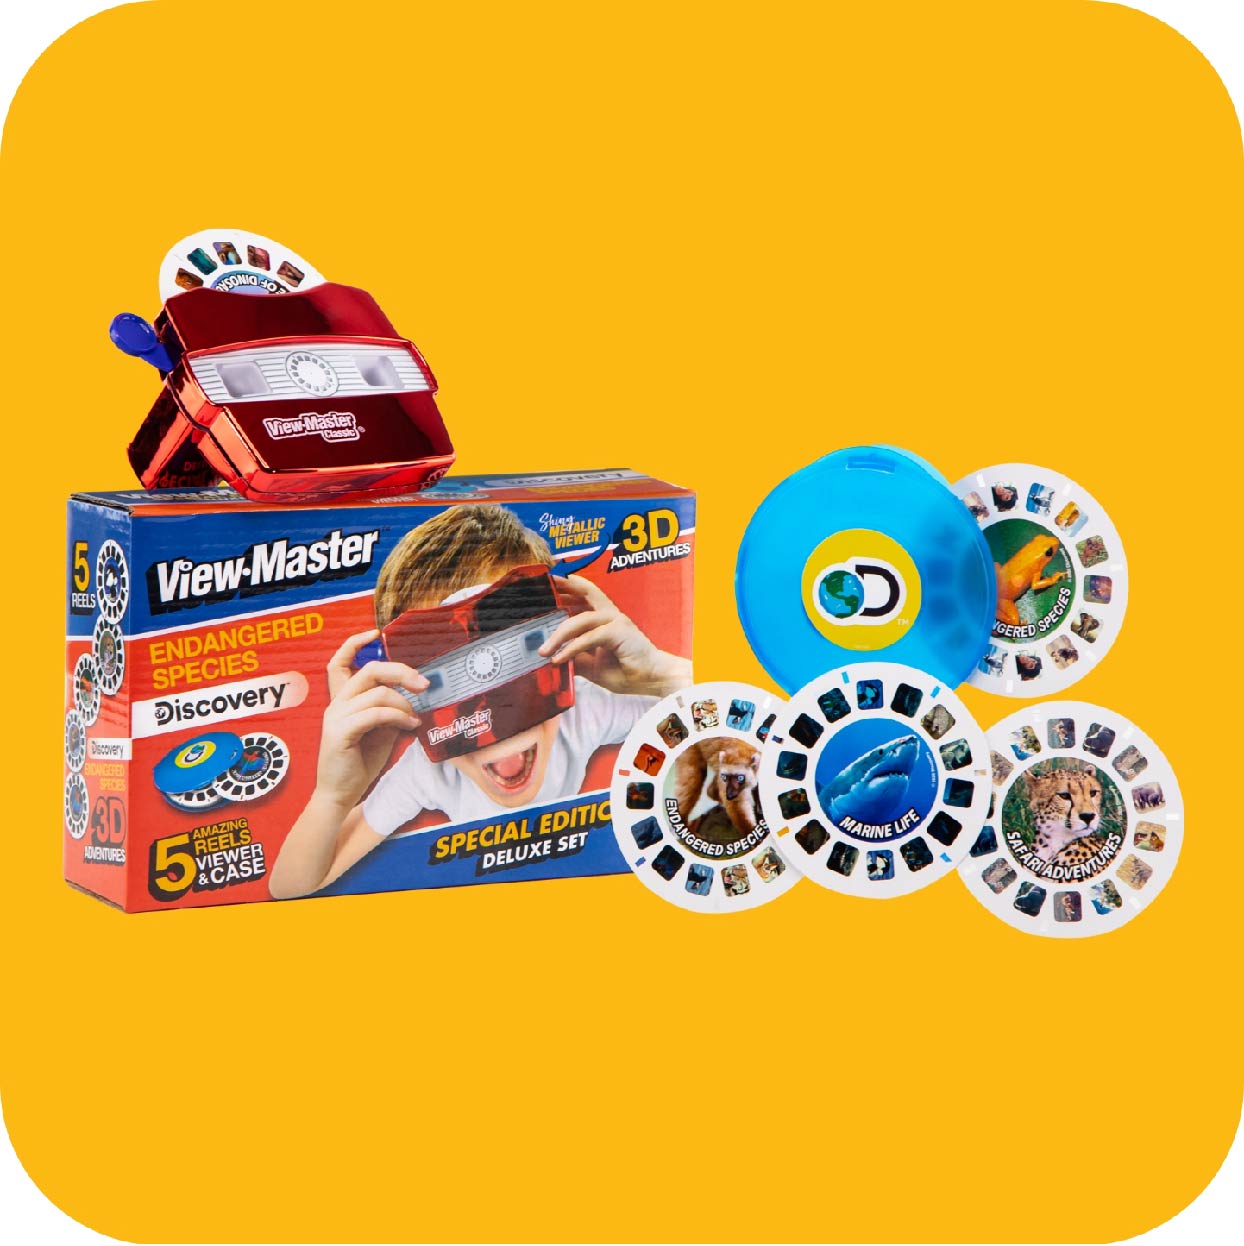 ViewMaster Deluxe set